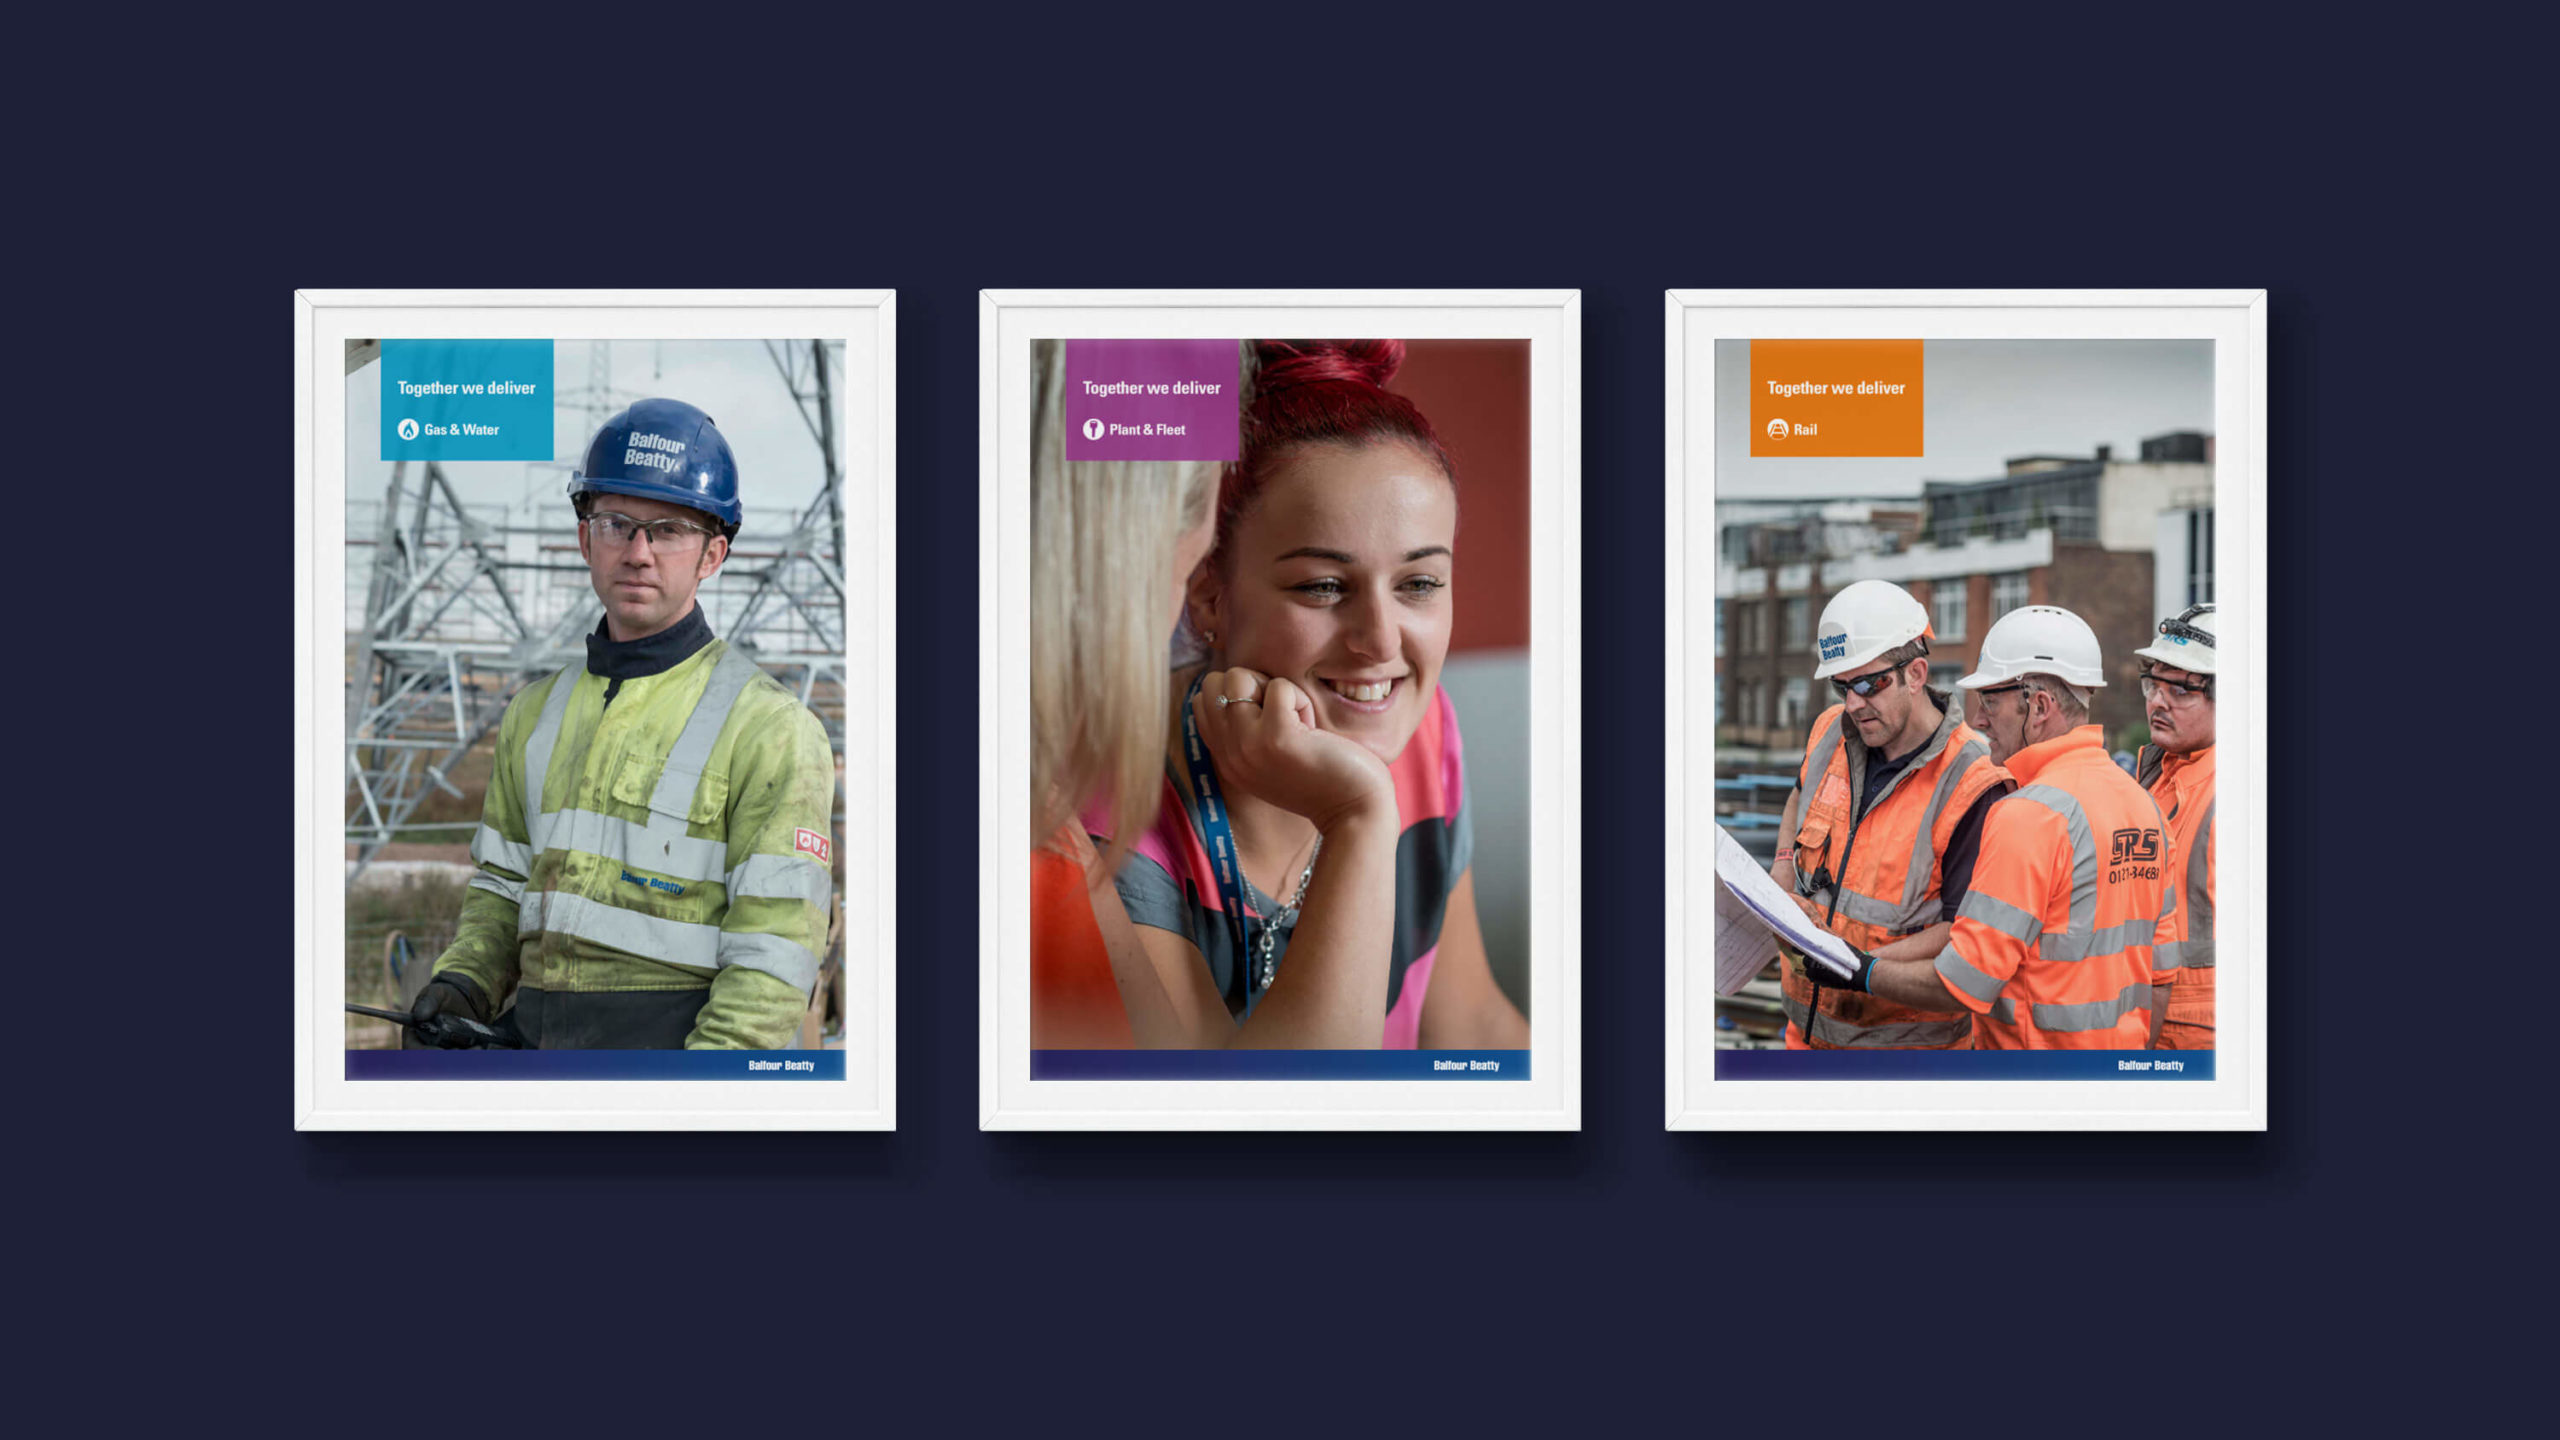 Balfour Beatty Services brand value posters with associated employee photography